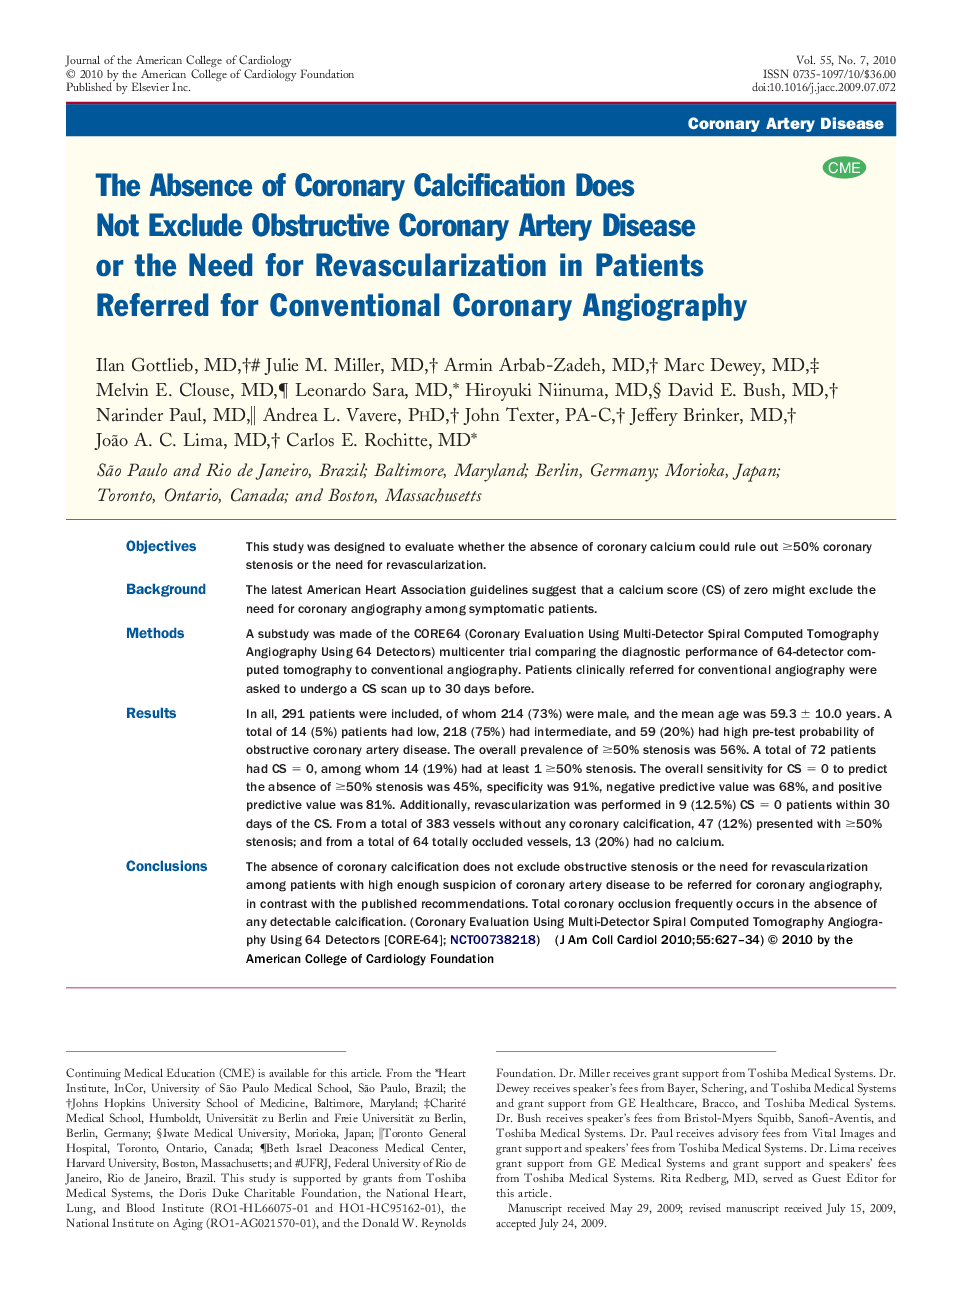 The Absence of Coronary Calcification Does Not Exclude Obstructive Coronary Artery Disease or the Need for Revascularization in Patients Referred for Conventional Coronary Angiography 